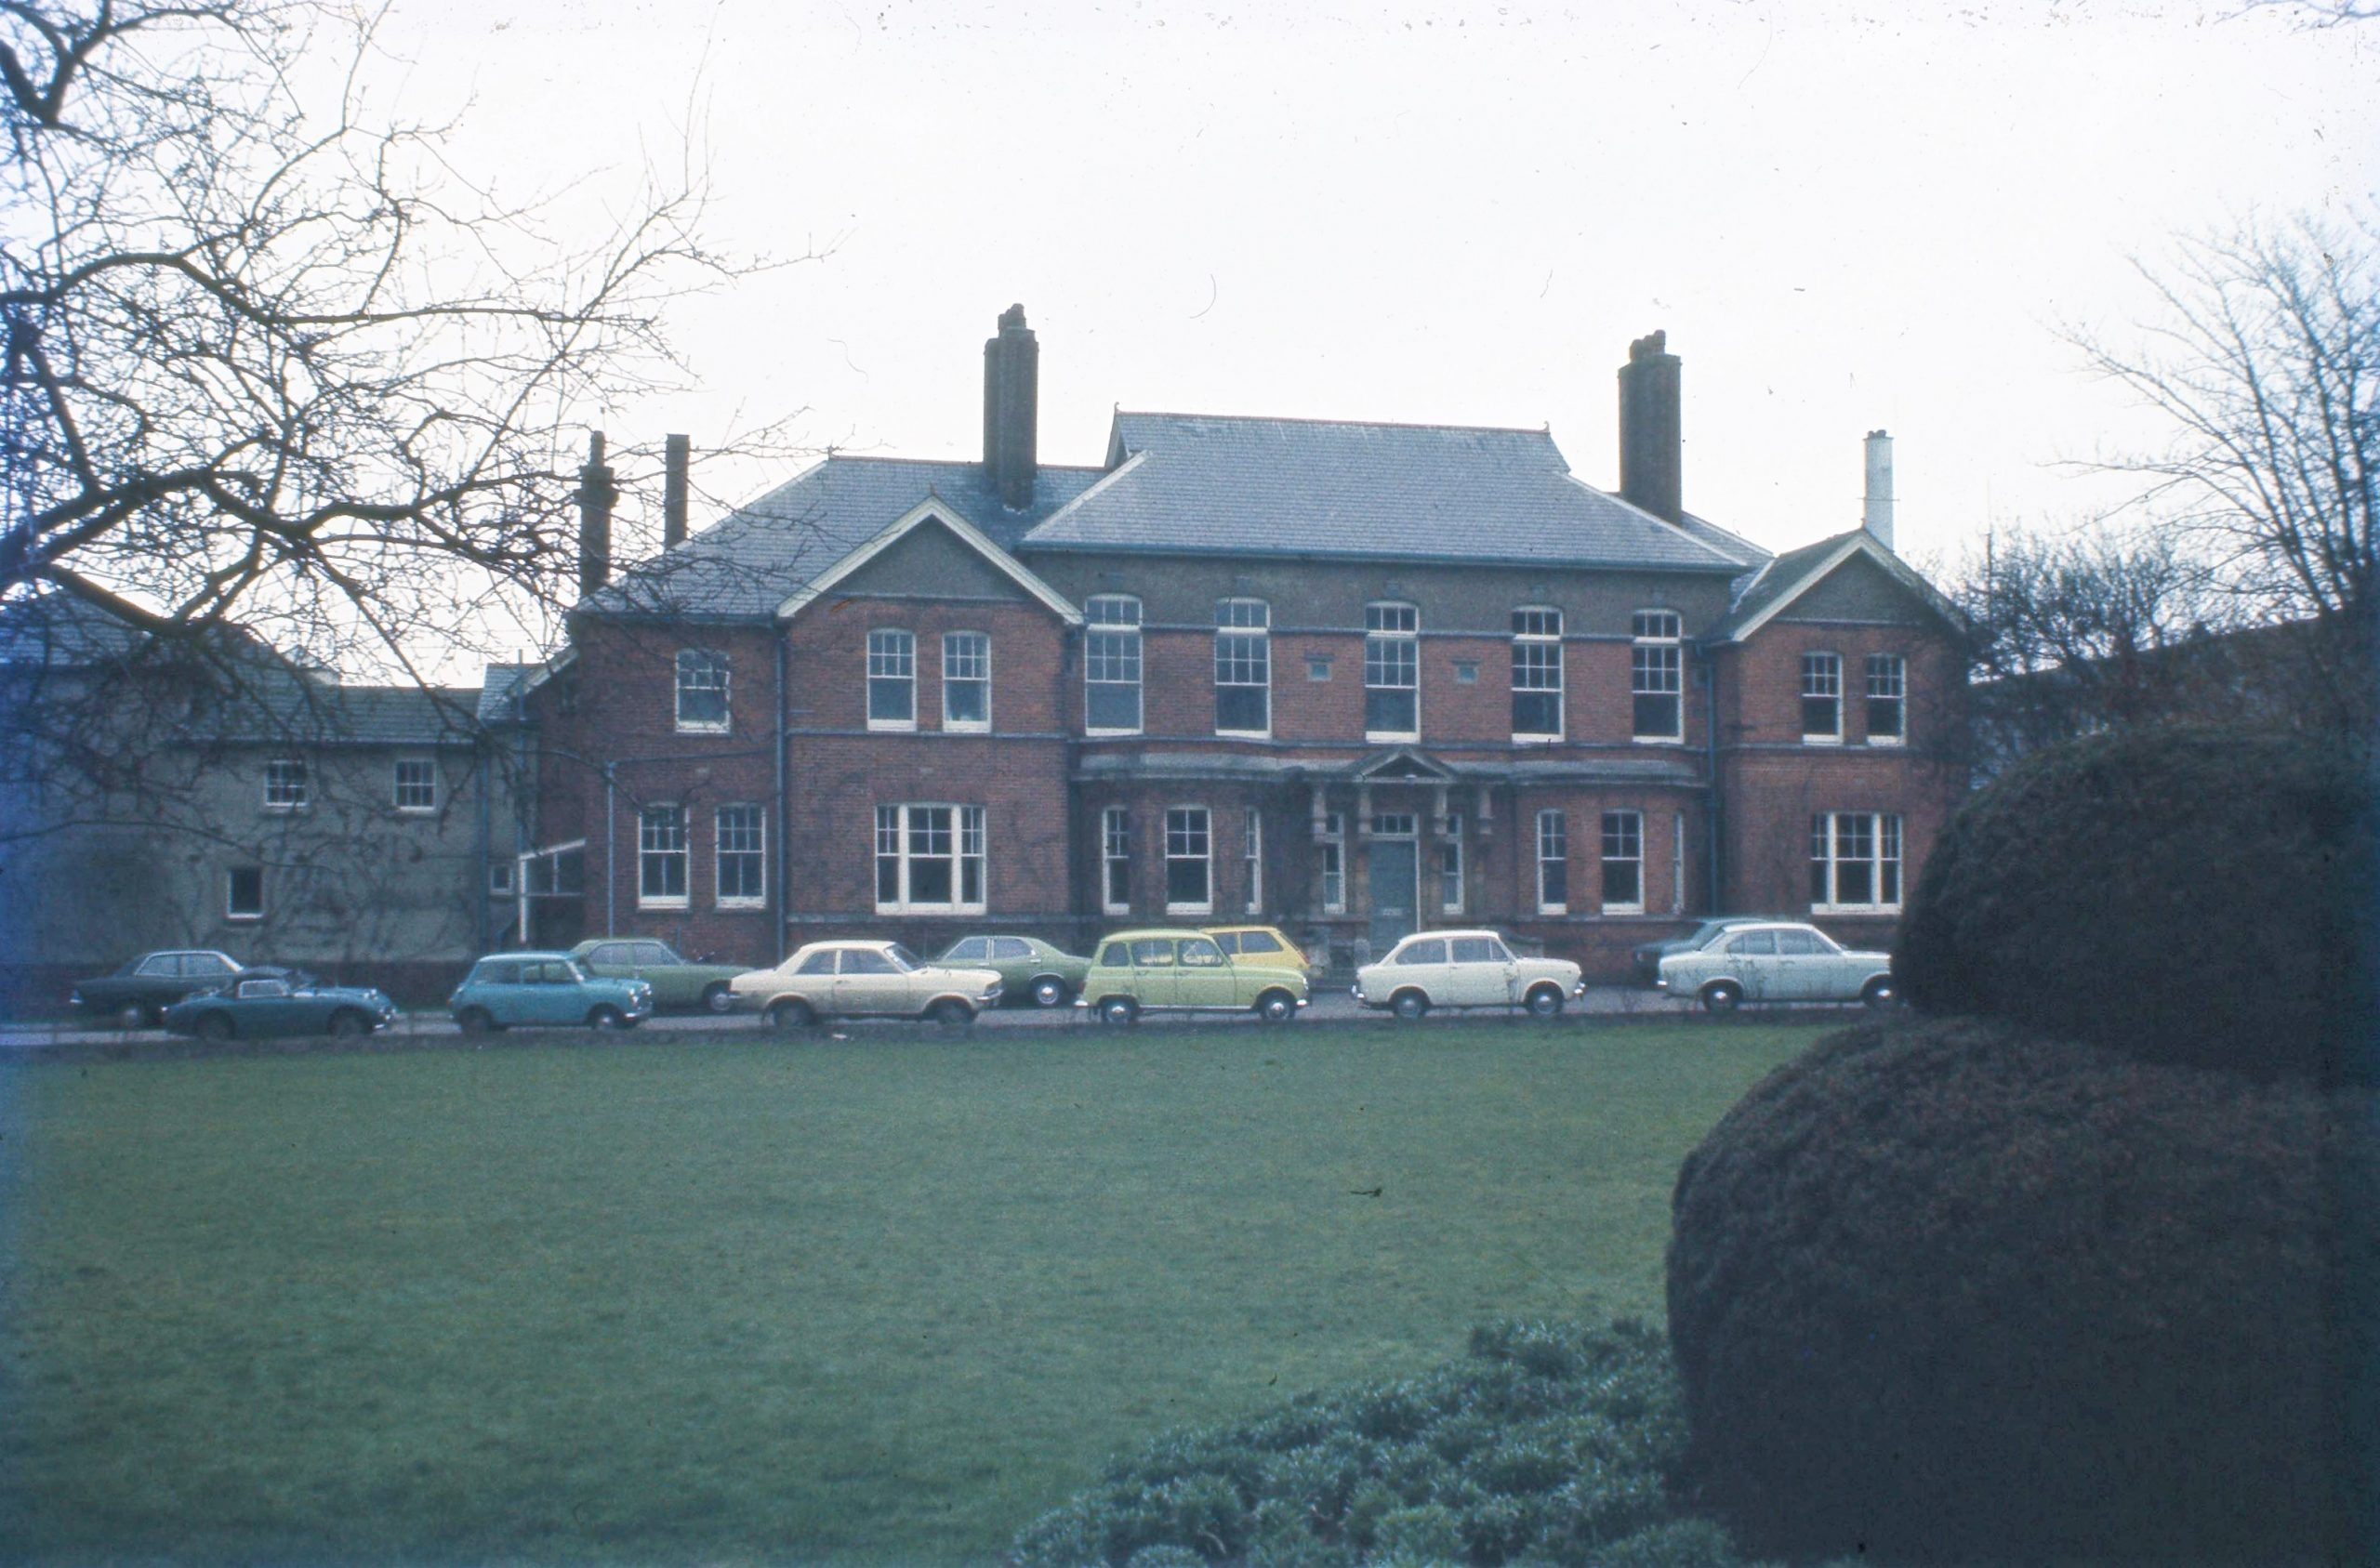 St. Mary's Hospital Etchinghill 021